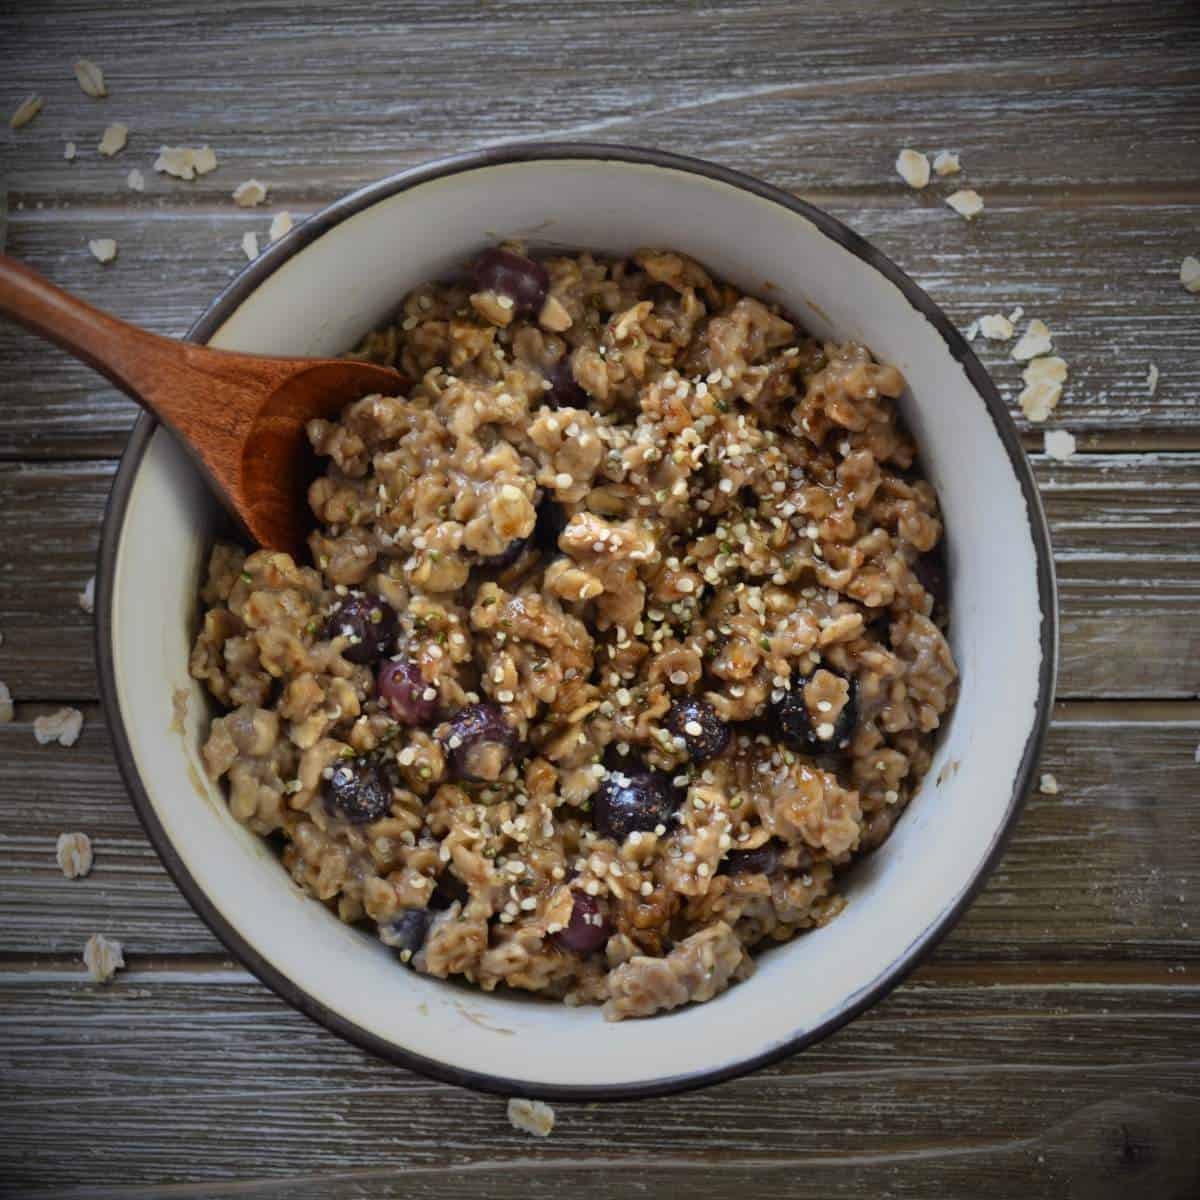 blueberry oatmeal in a bowl with wooden spoon.